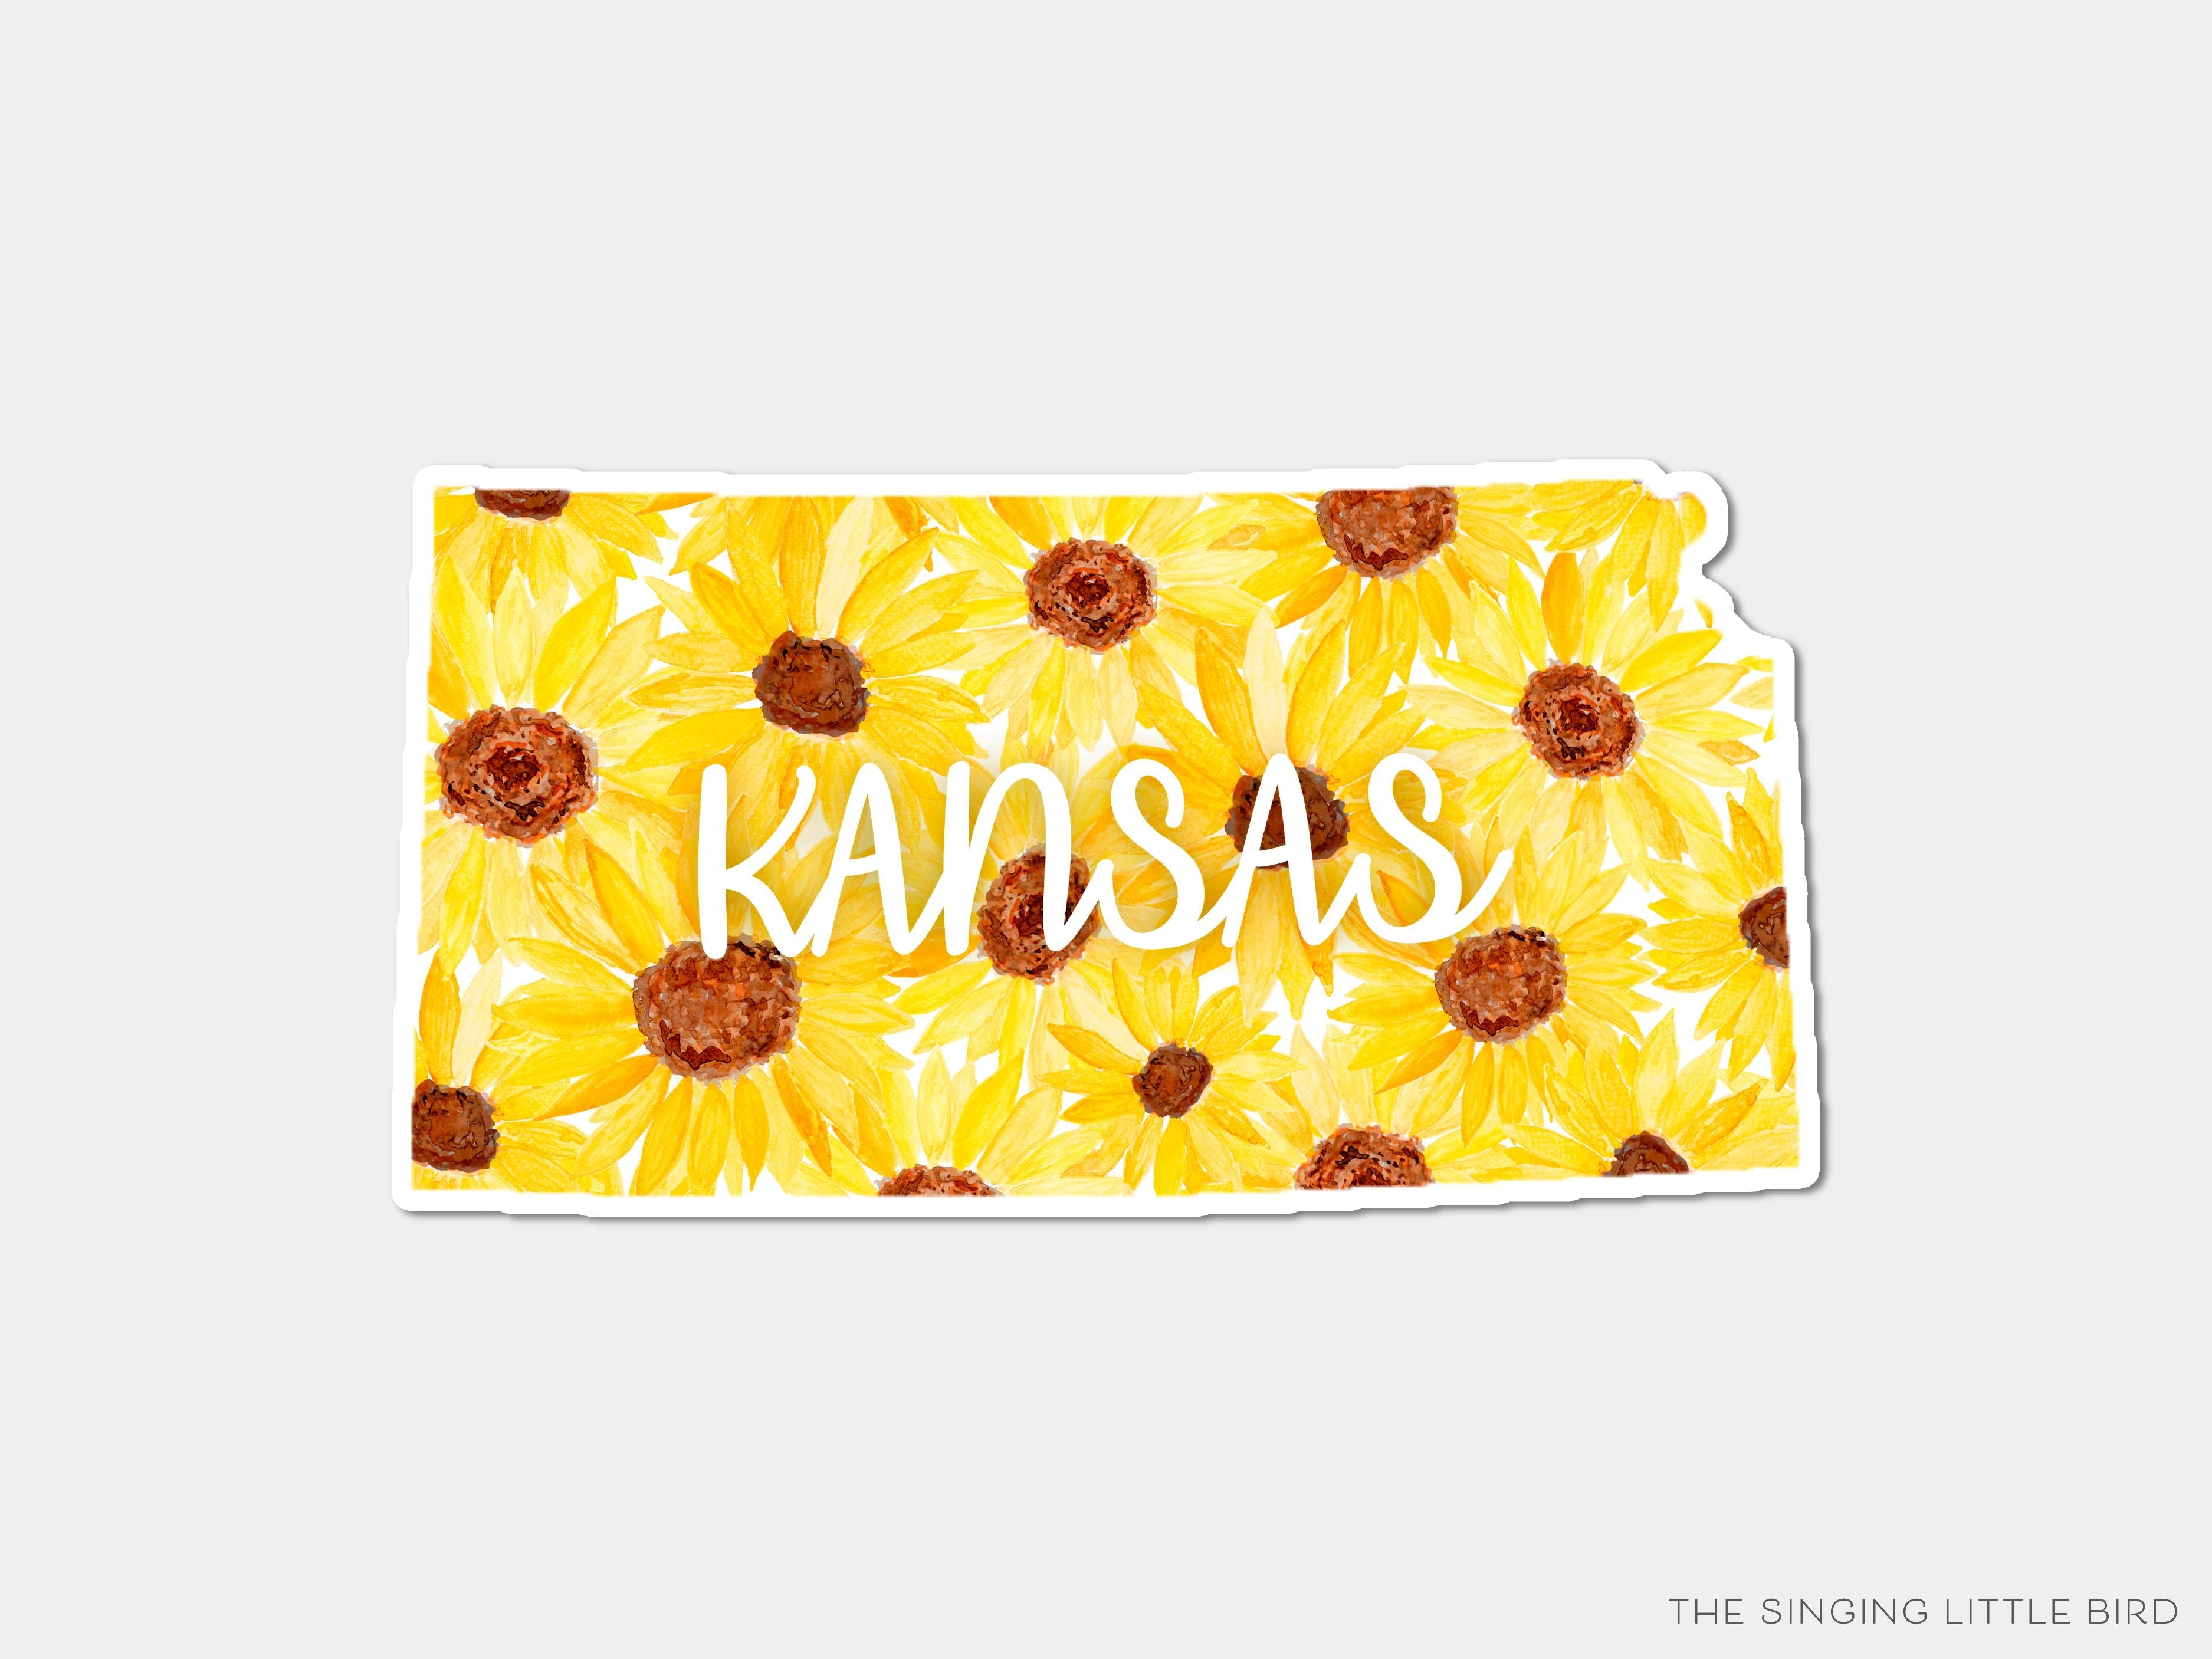 Kansas Sunflower Vinyl Sticker-These weatherproof die cut stickers feature our hand-painted watercolor Kansas sunflowers, making great laptop or water bottle stickers or gifts for the Kansas lover in your life.-The Singing Little Bird